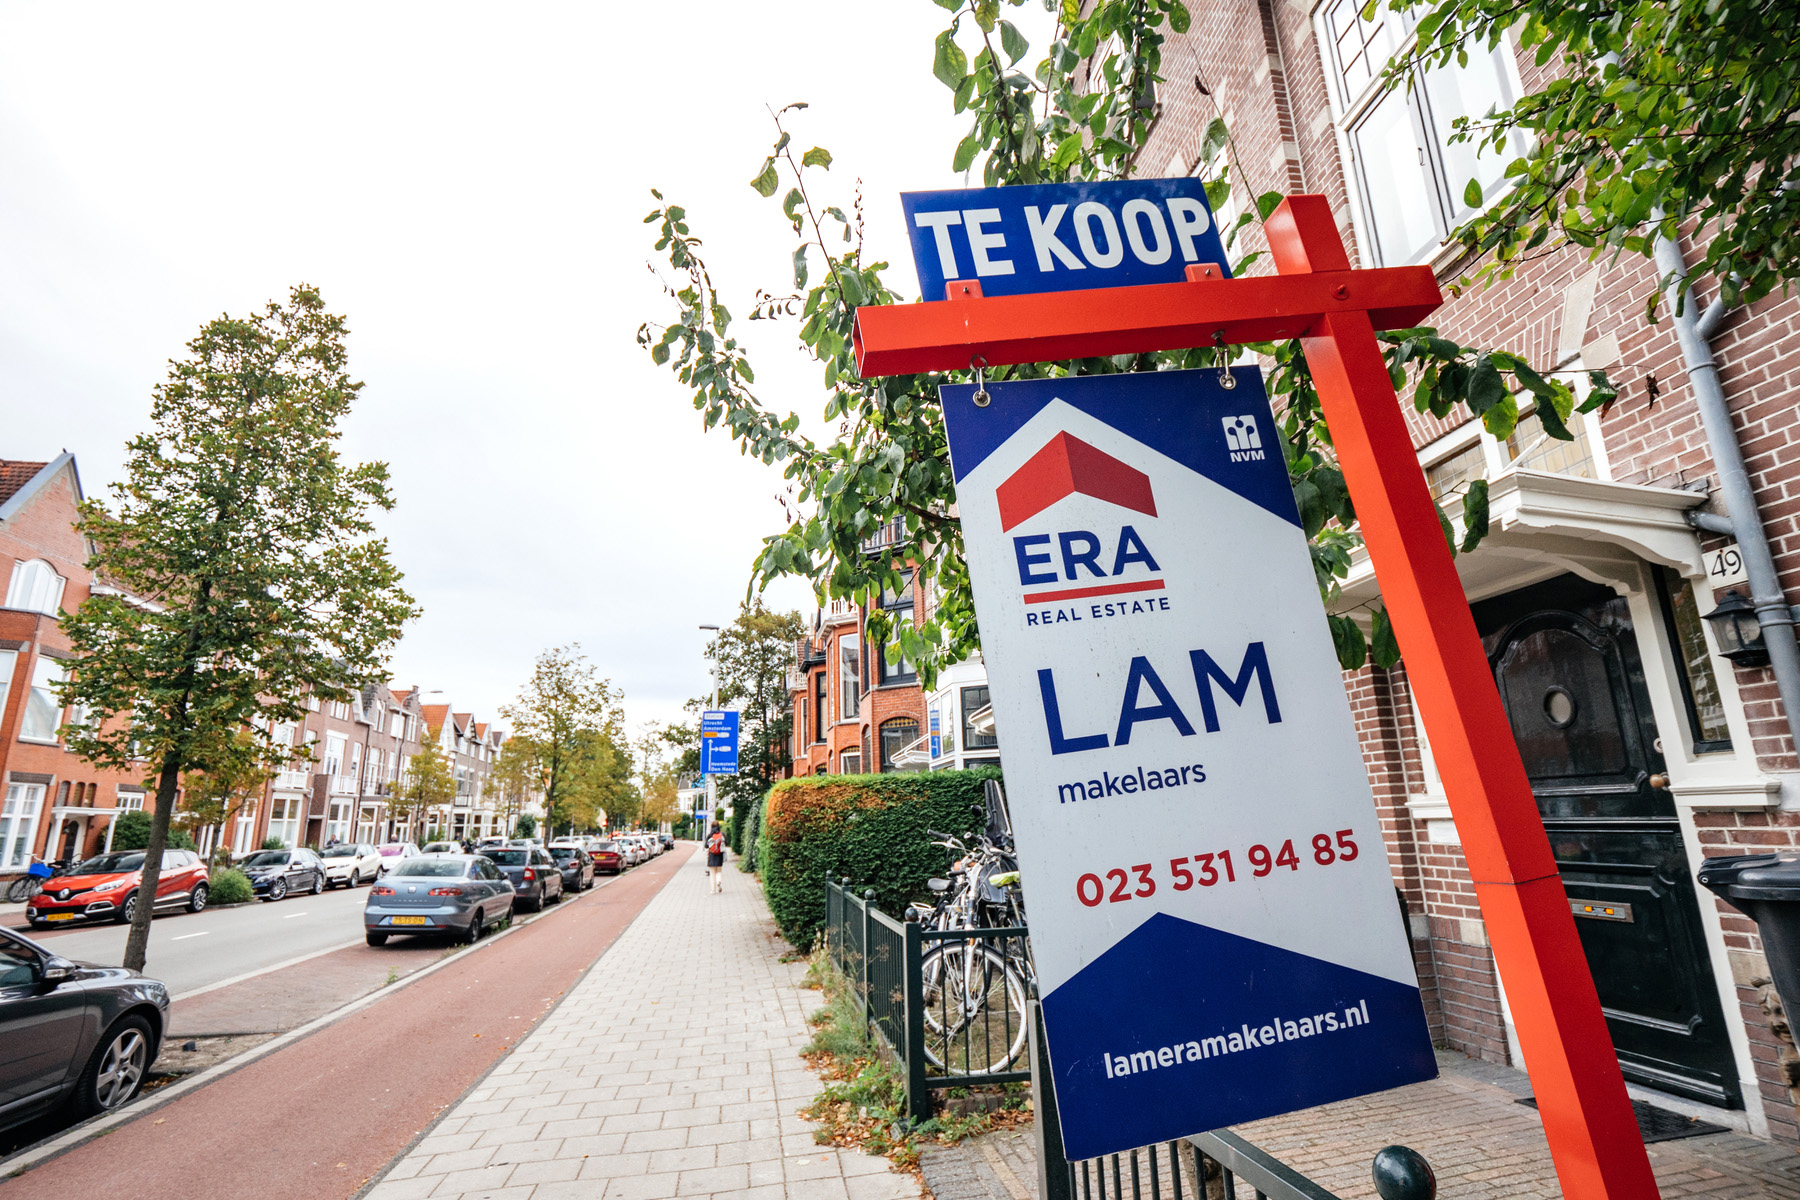 A house for sale in Haarlem, the Netherlands